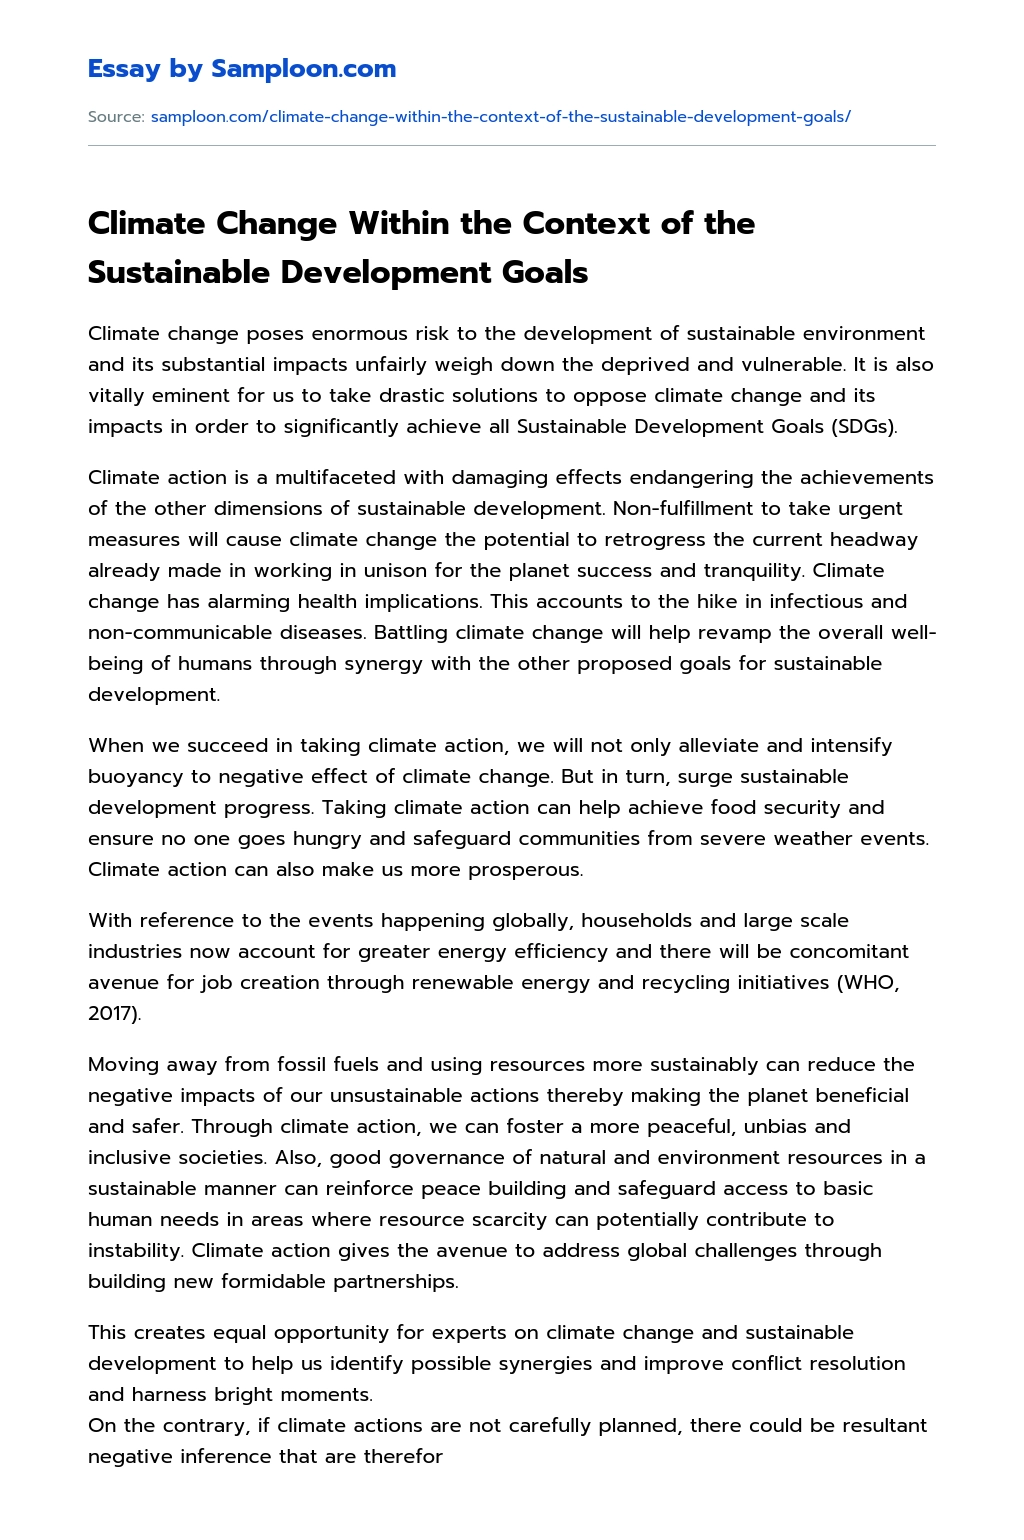 Climate Change Within the Context of the Sustainable Development Goals essay